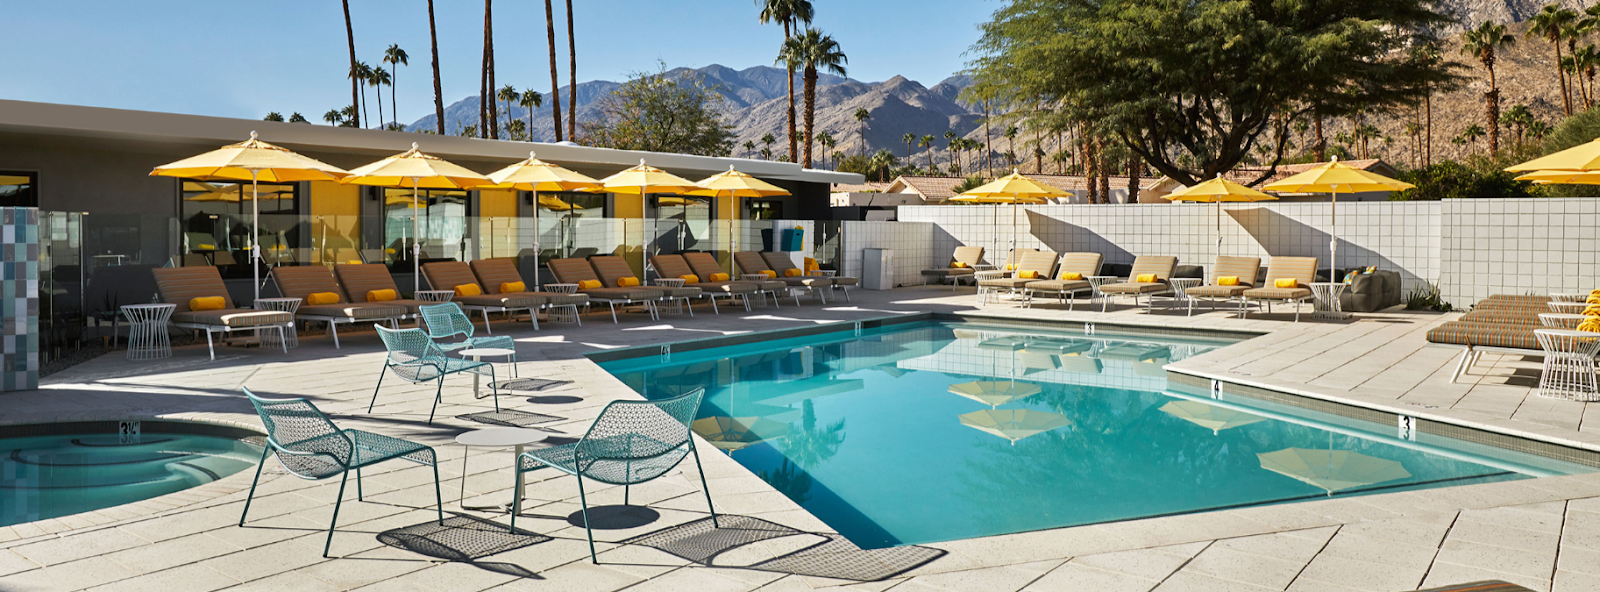 Twin Palms Resort outdoor pool and lounge area showing off the sunny weather and mountain views 